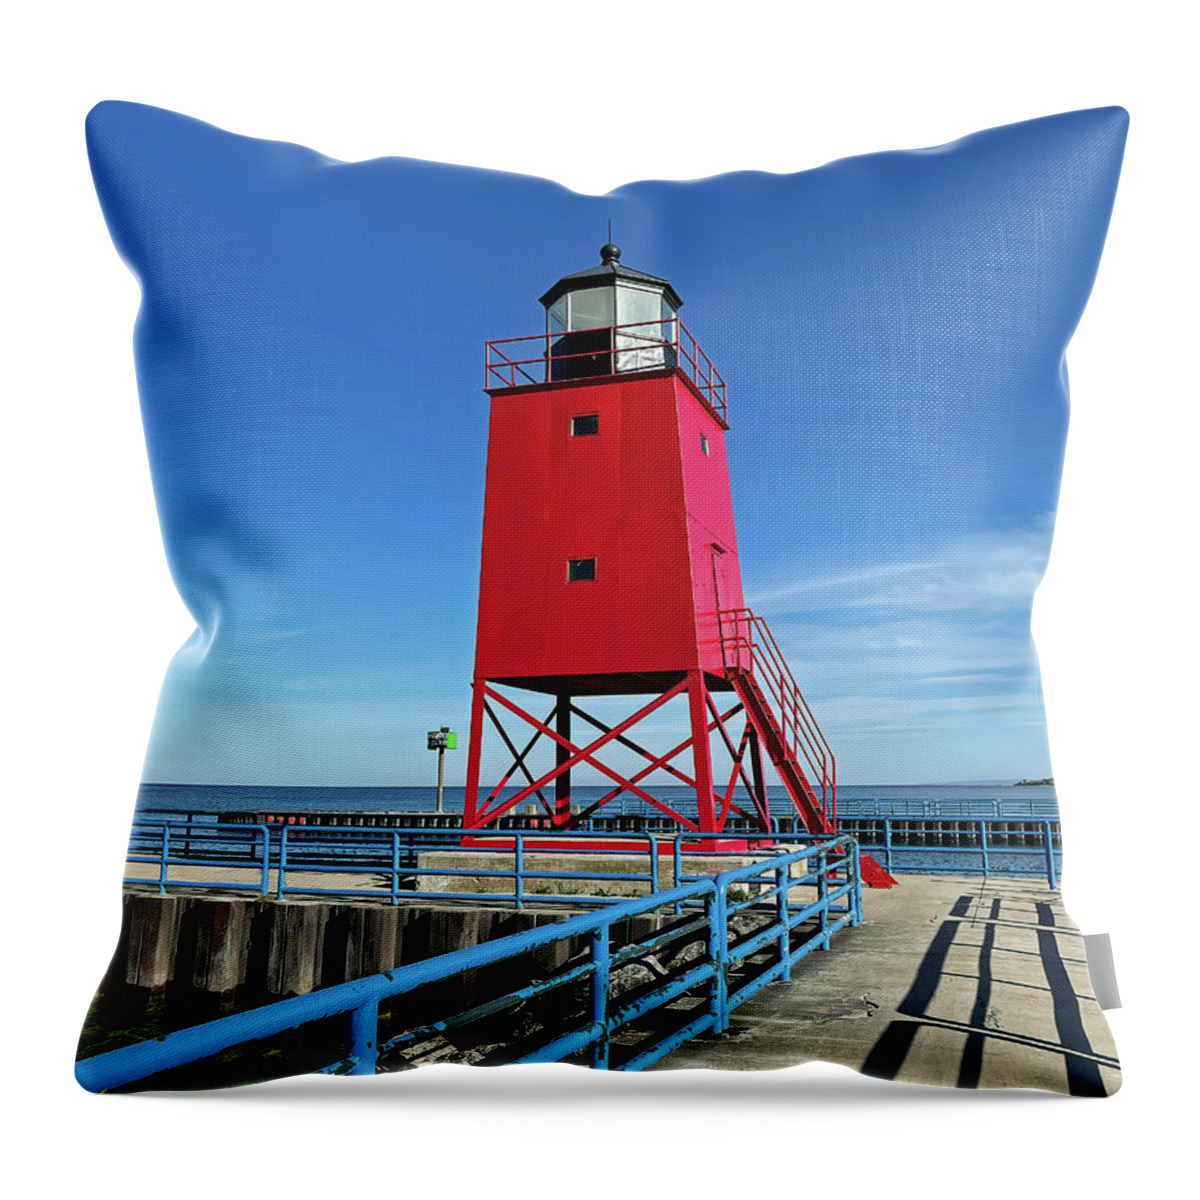 Charlevoix Throw Pillow featuring the photograph Charlevoix South Pier Lighthouse by Bill Swartwout